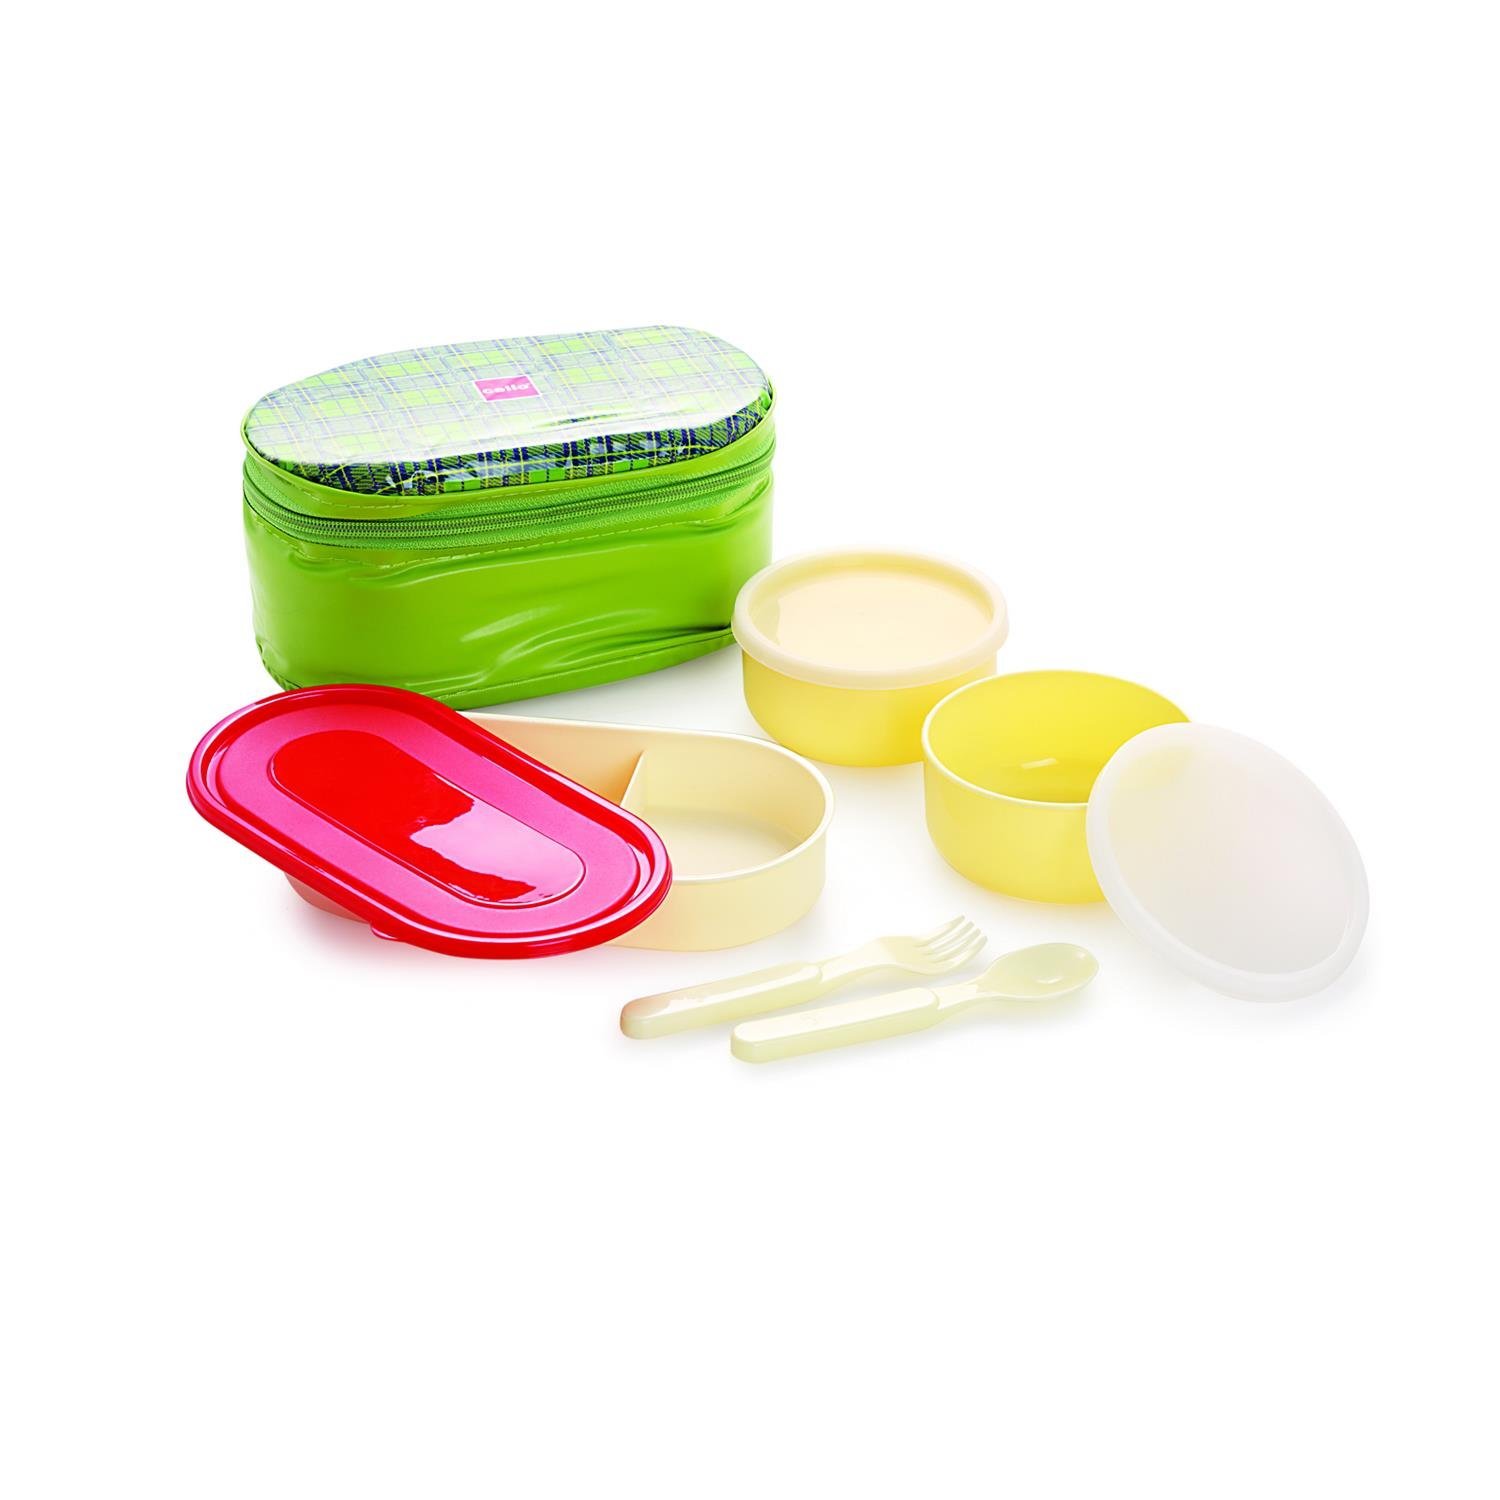 Buy Cello Mega Bite 3 Container Lunch Packs, Green at Rs 160 only